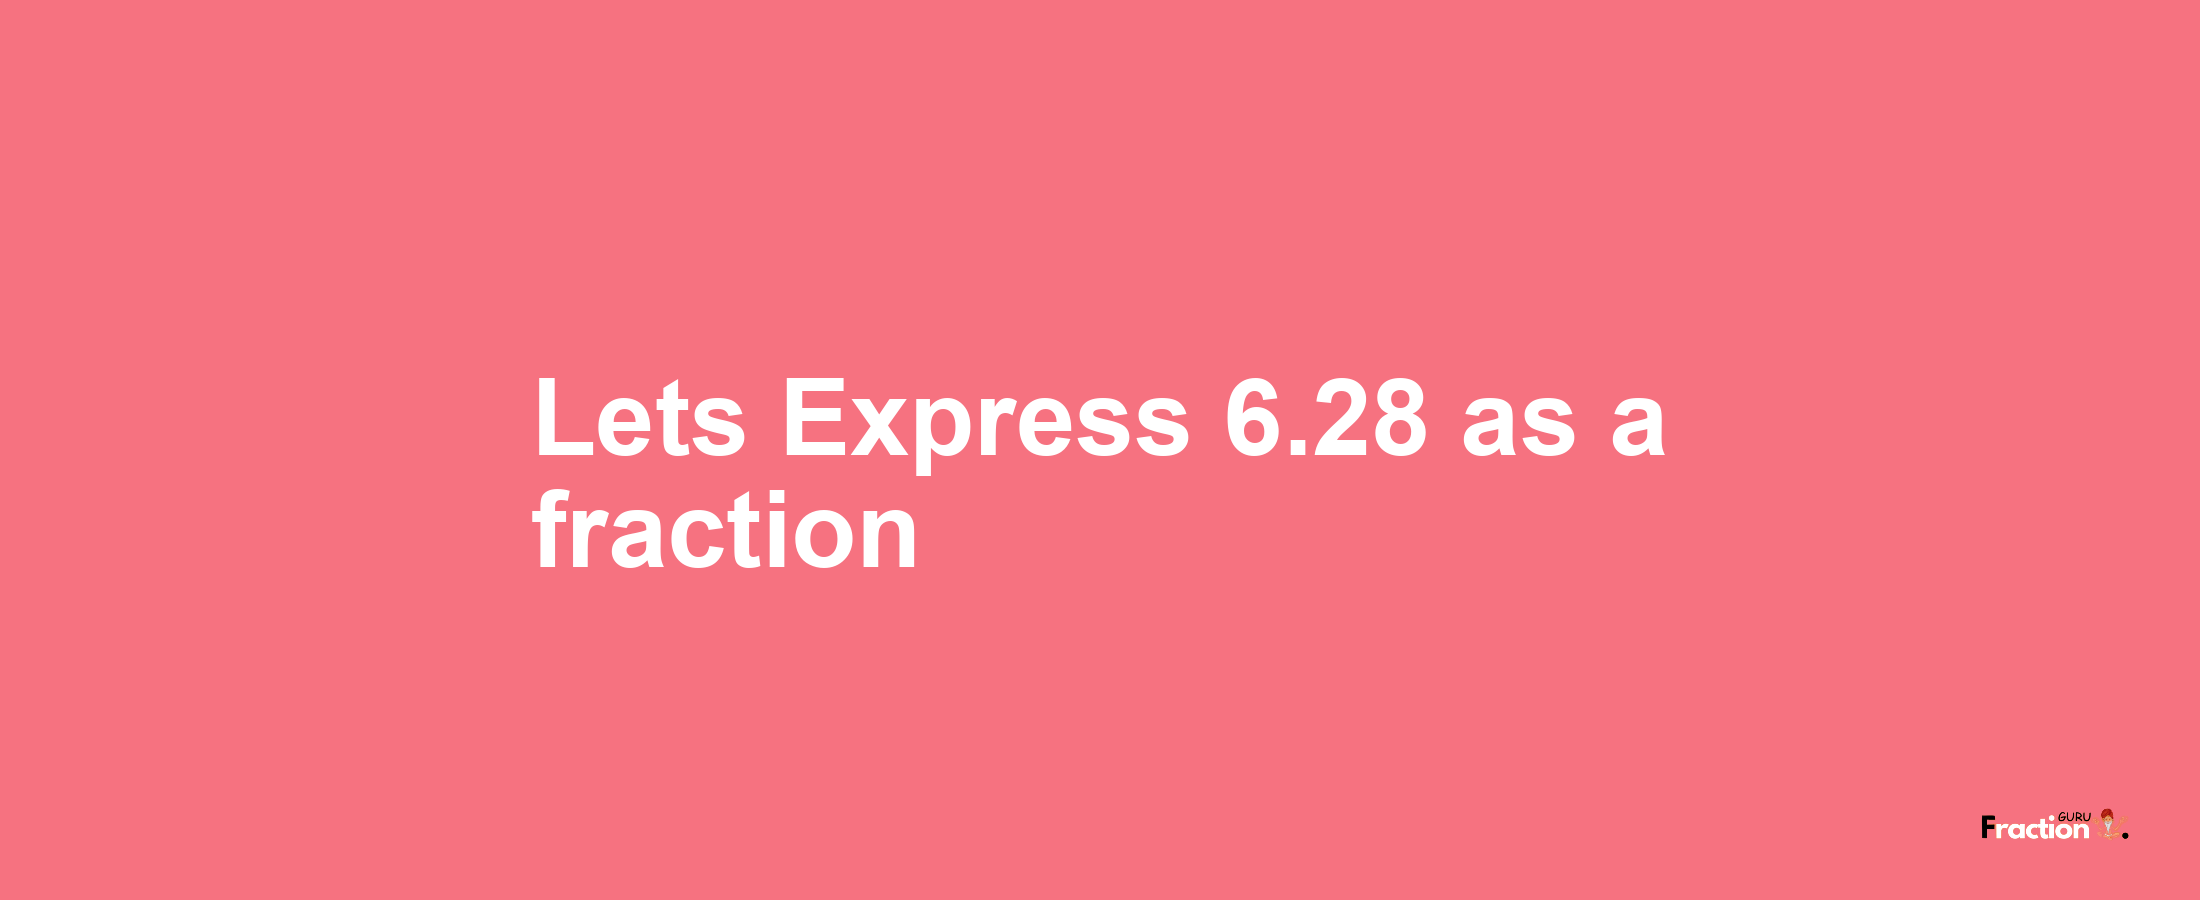 Lets Express 6.28 as afraction